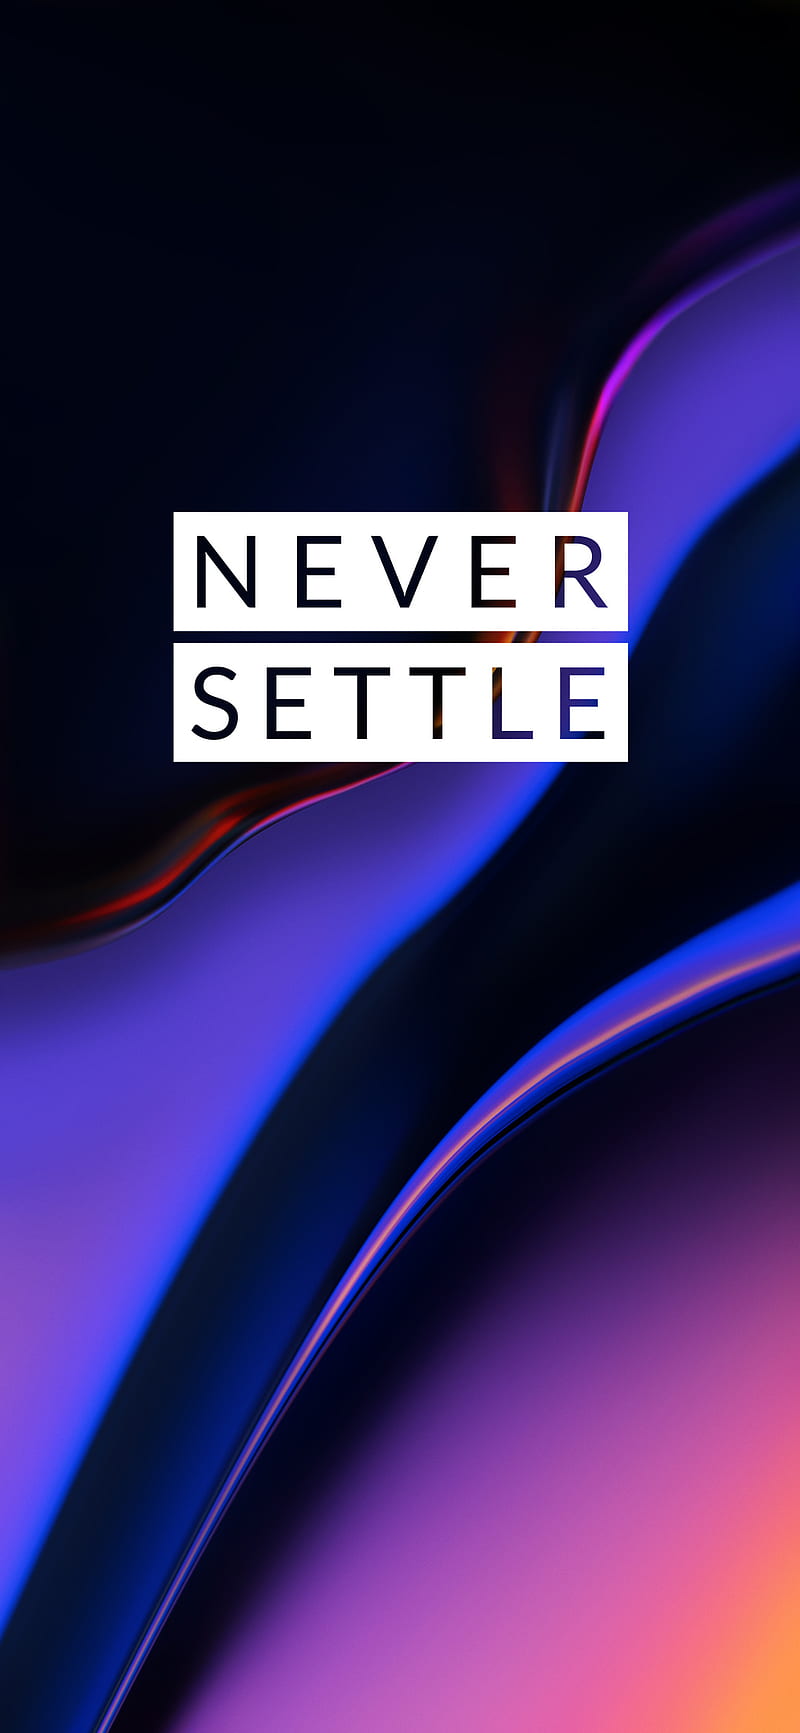 OnePlus 6T - NS3, neversettle, android , blue, red, logo, HD phone wallpaper